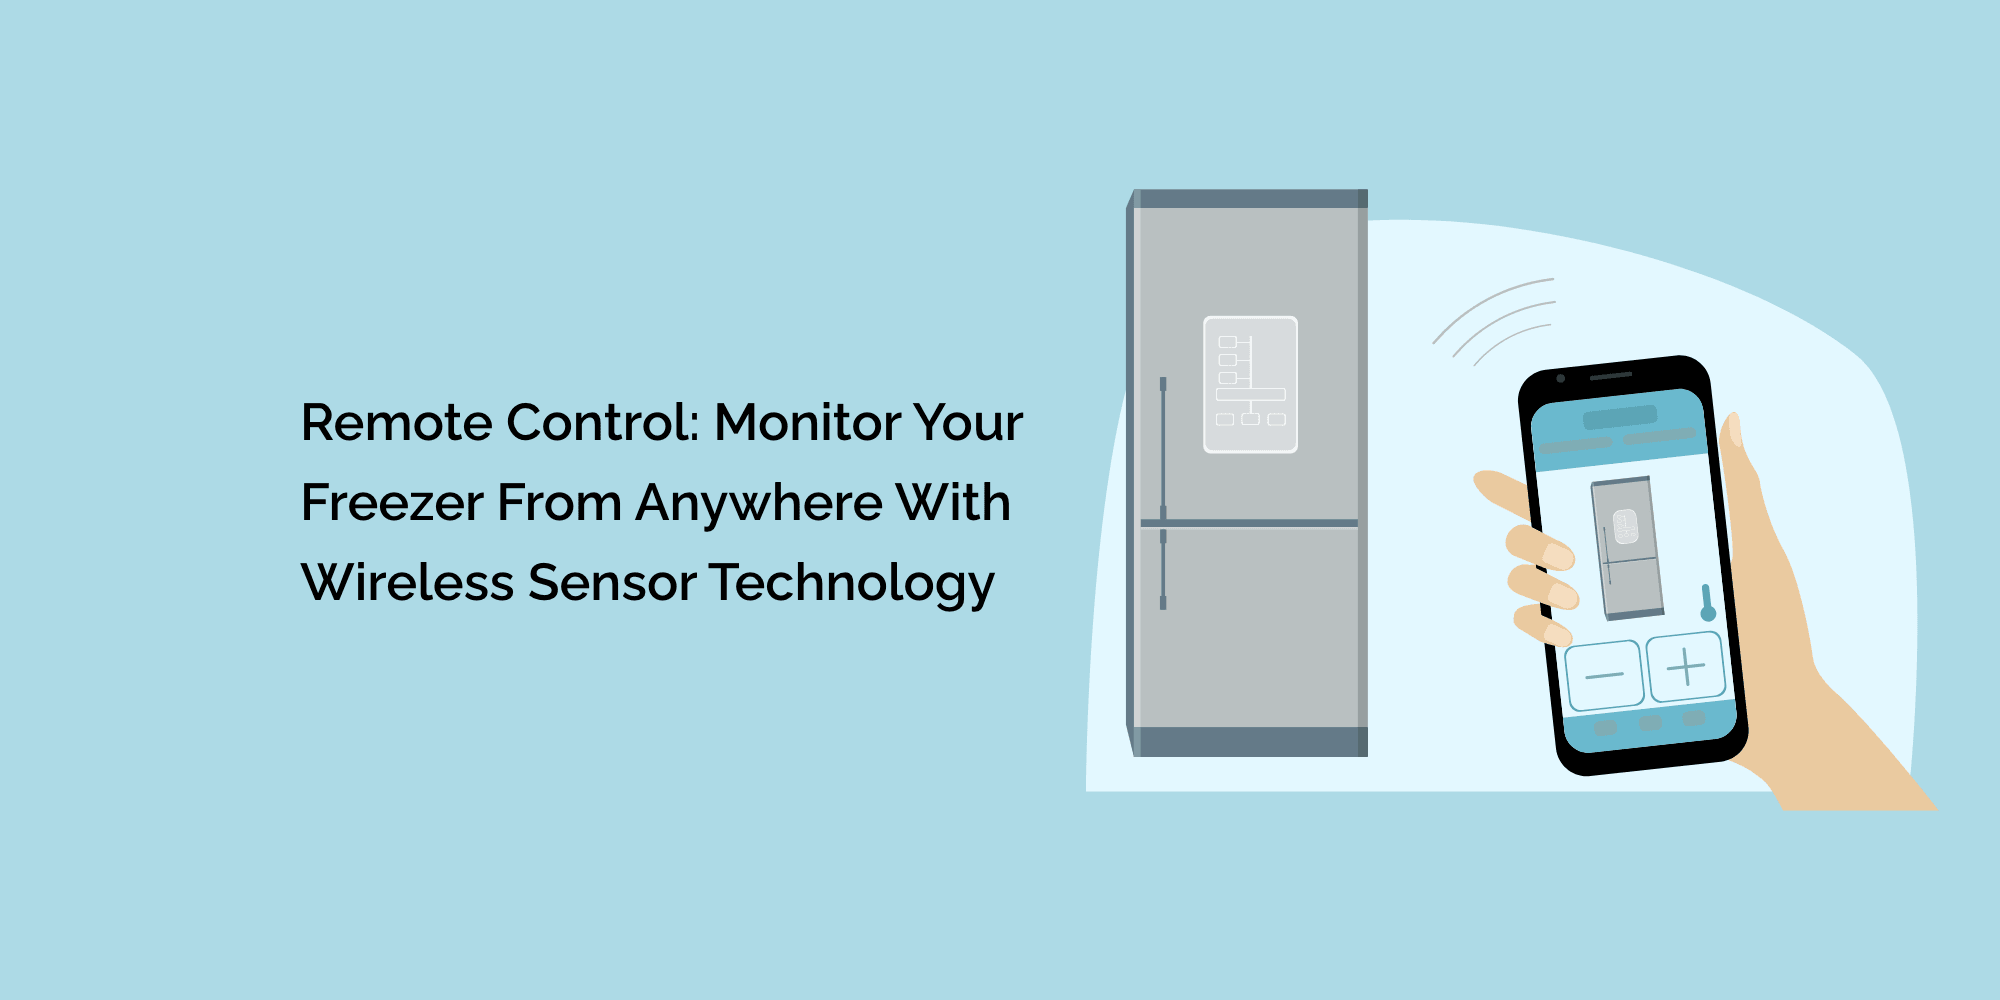 Remote Control: Monitor Your Freezer From Anywhere With Wireless Sensor Technology